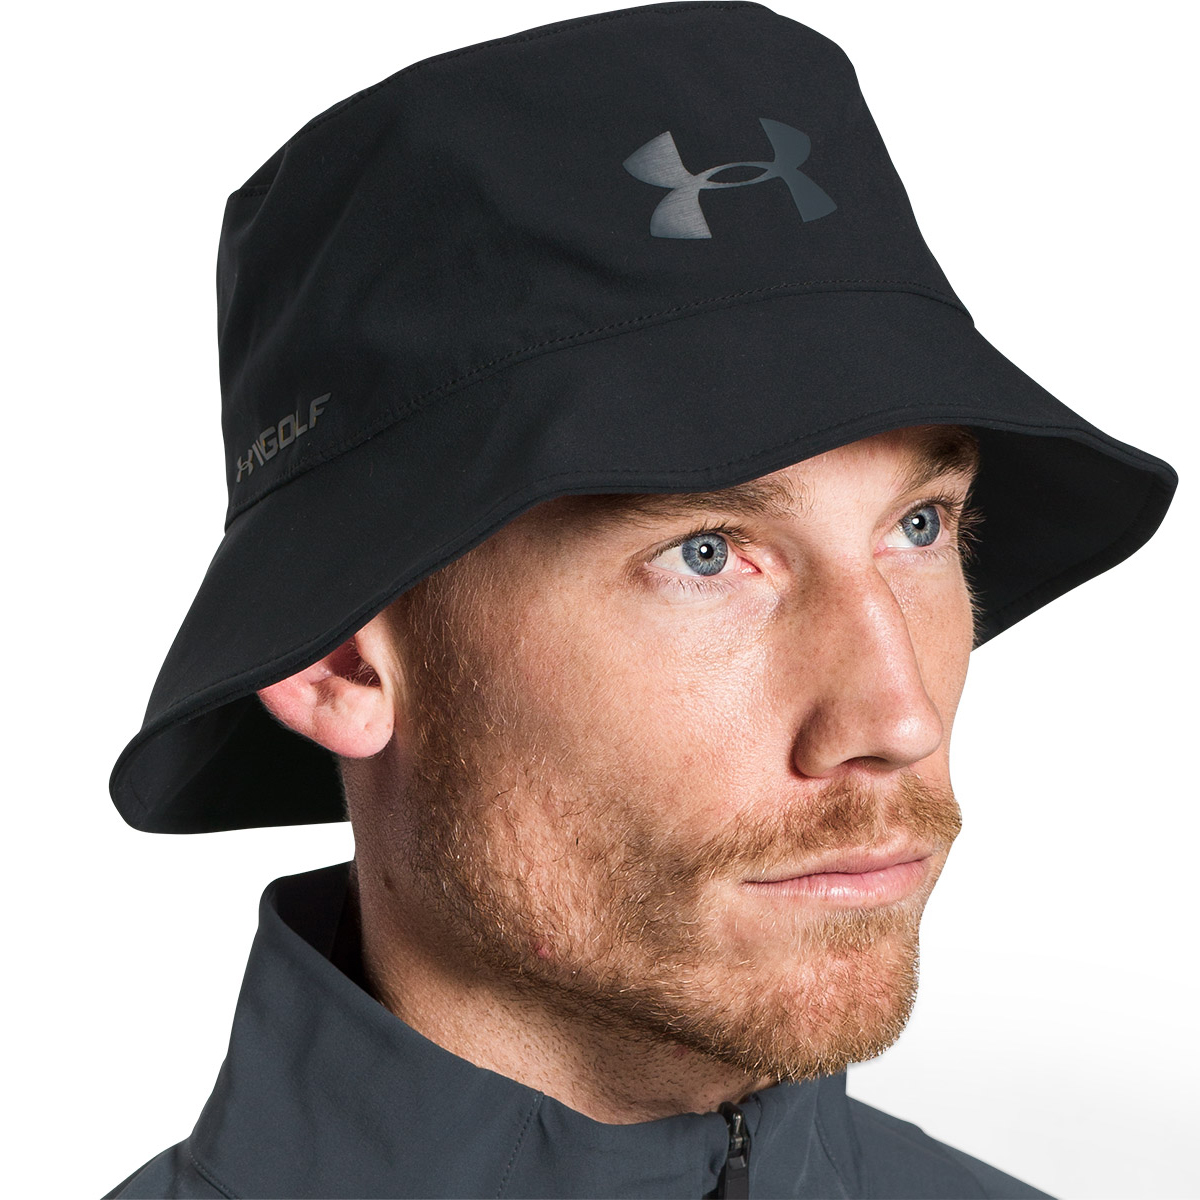 GORE-TEX Bucket Hat from american golf